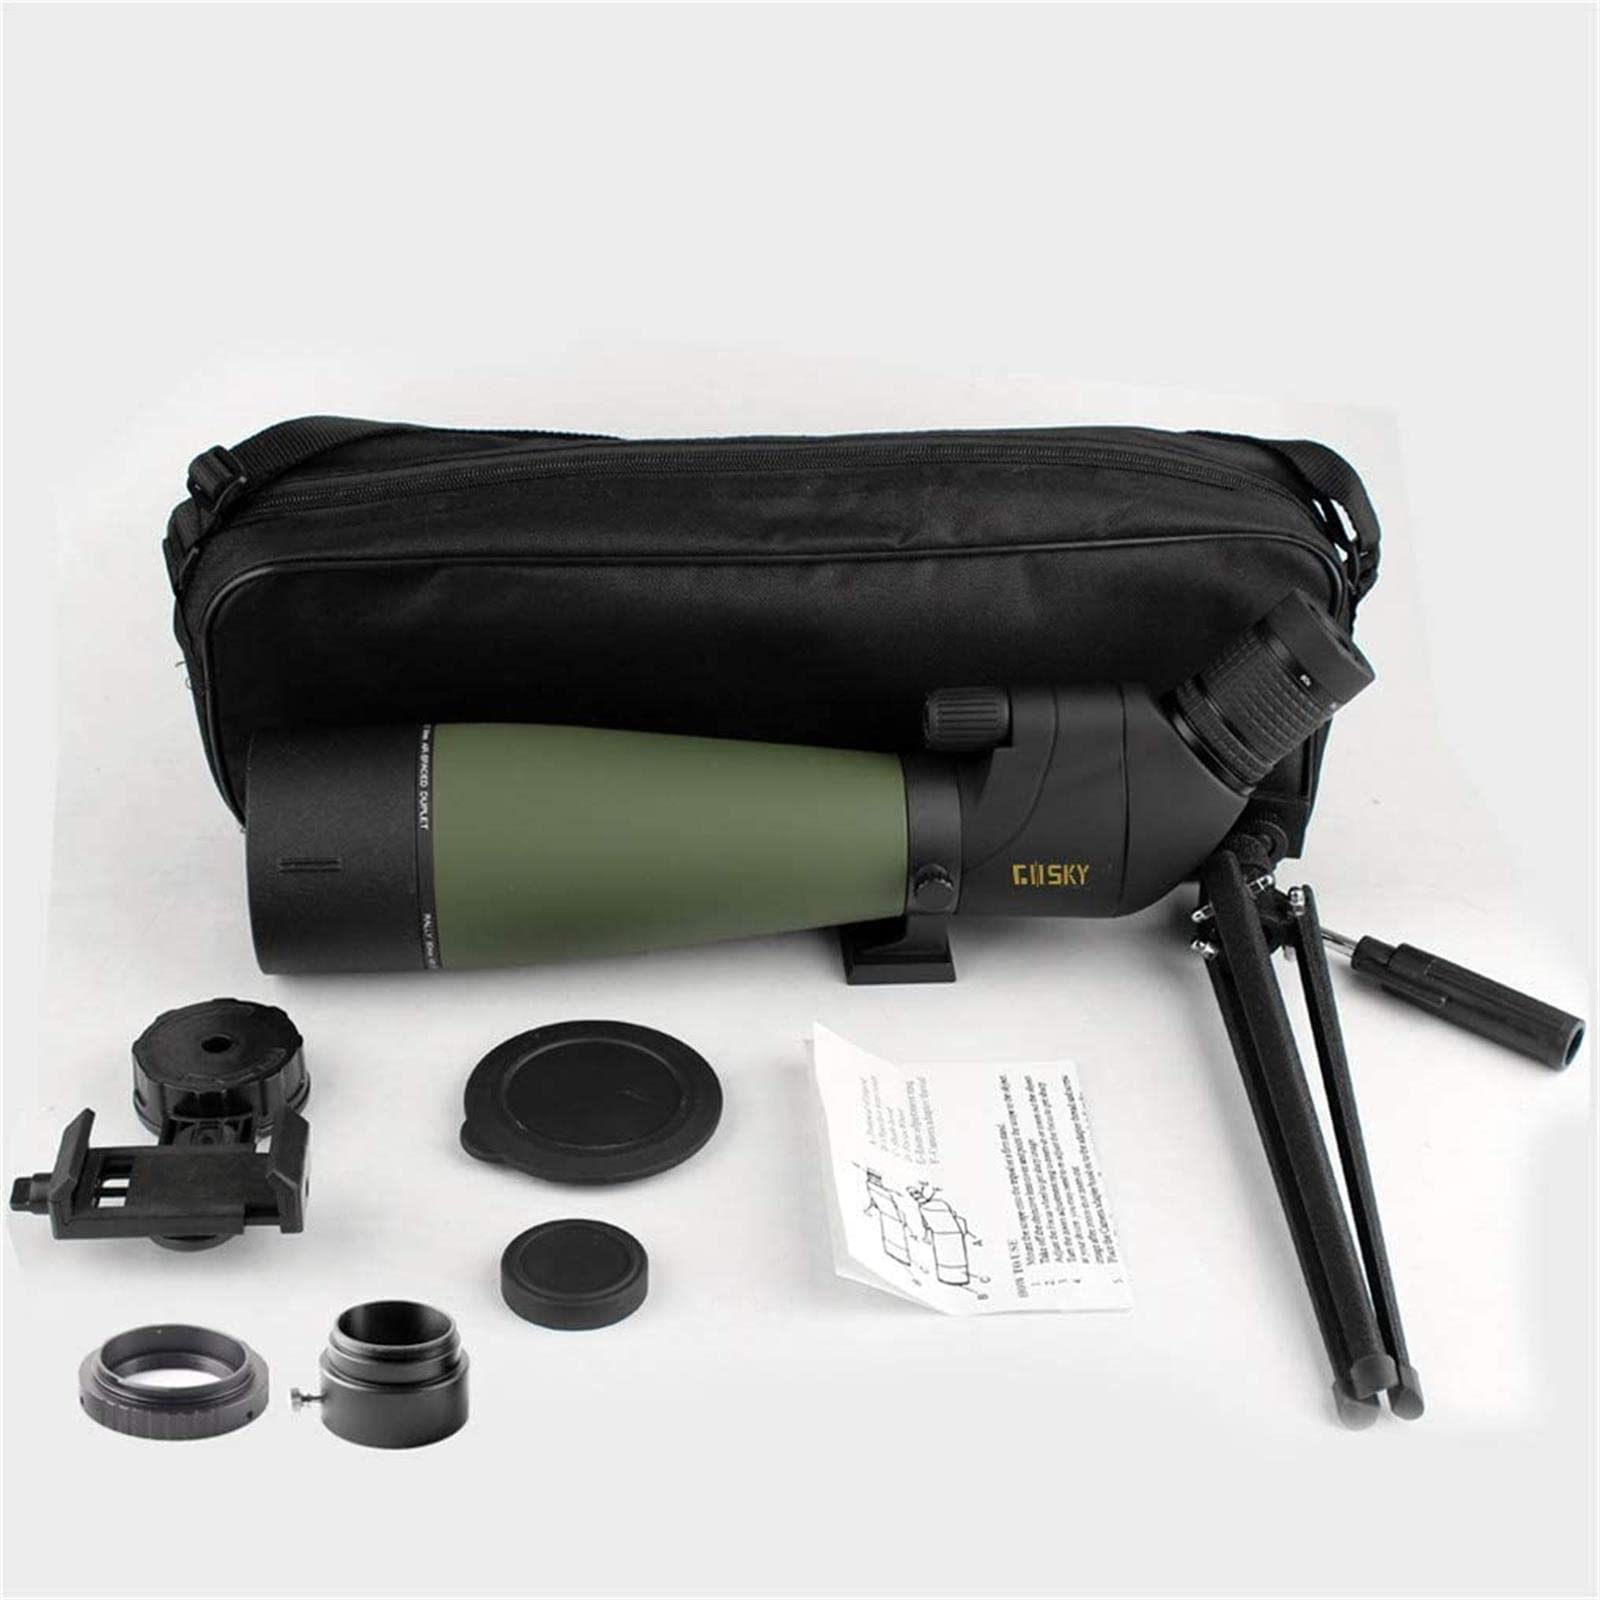 GOSKY Updated 20-60x80 Spotting Scope with Tripod, Carrying Bag - BAK4 Angled Scope for Target Shooting Hunting Bird Watching Wildlife Scenery (with Smartphone Adapter+SLR Mount compatible with Nikon)